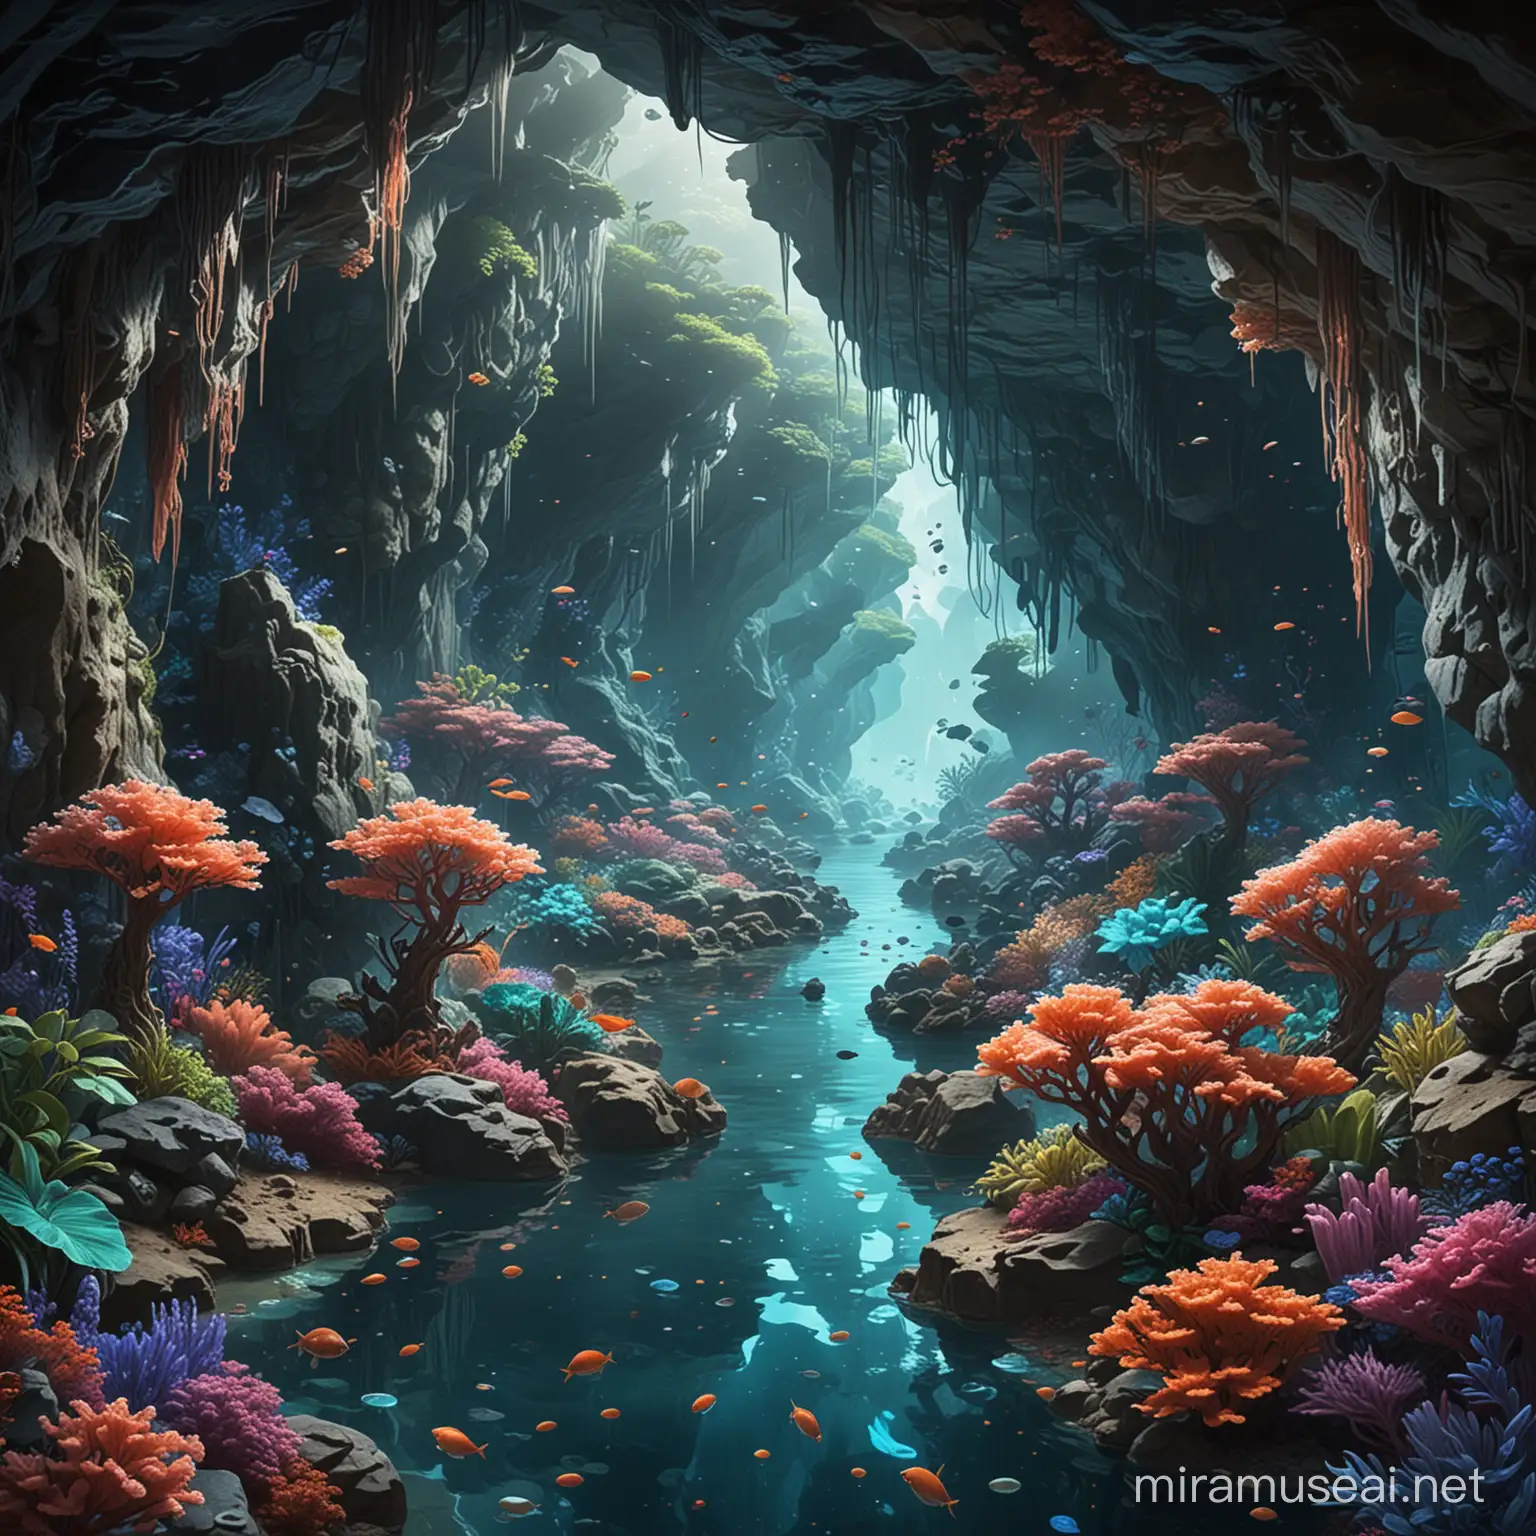 Exploring Misty Bloom Cave Submerged Adventure Among Exotic Fauna and Sapphires